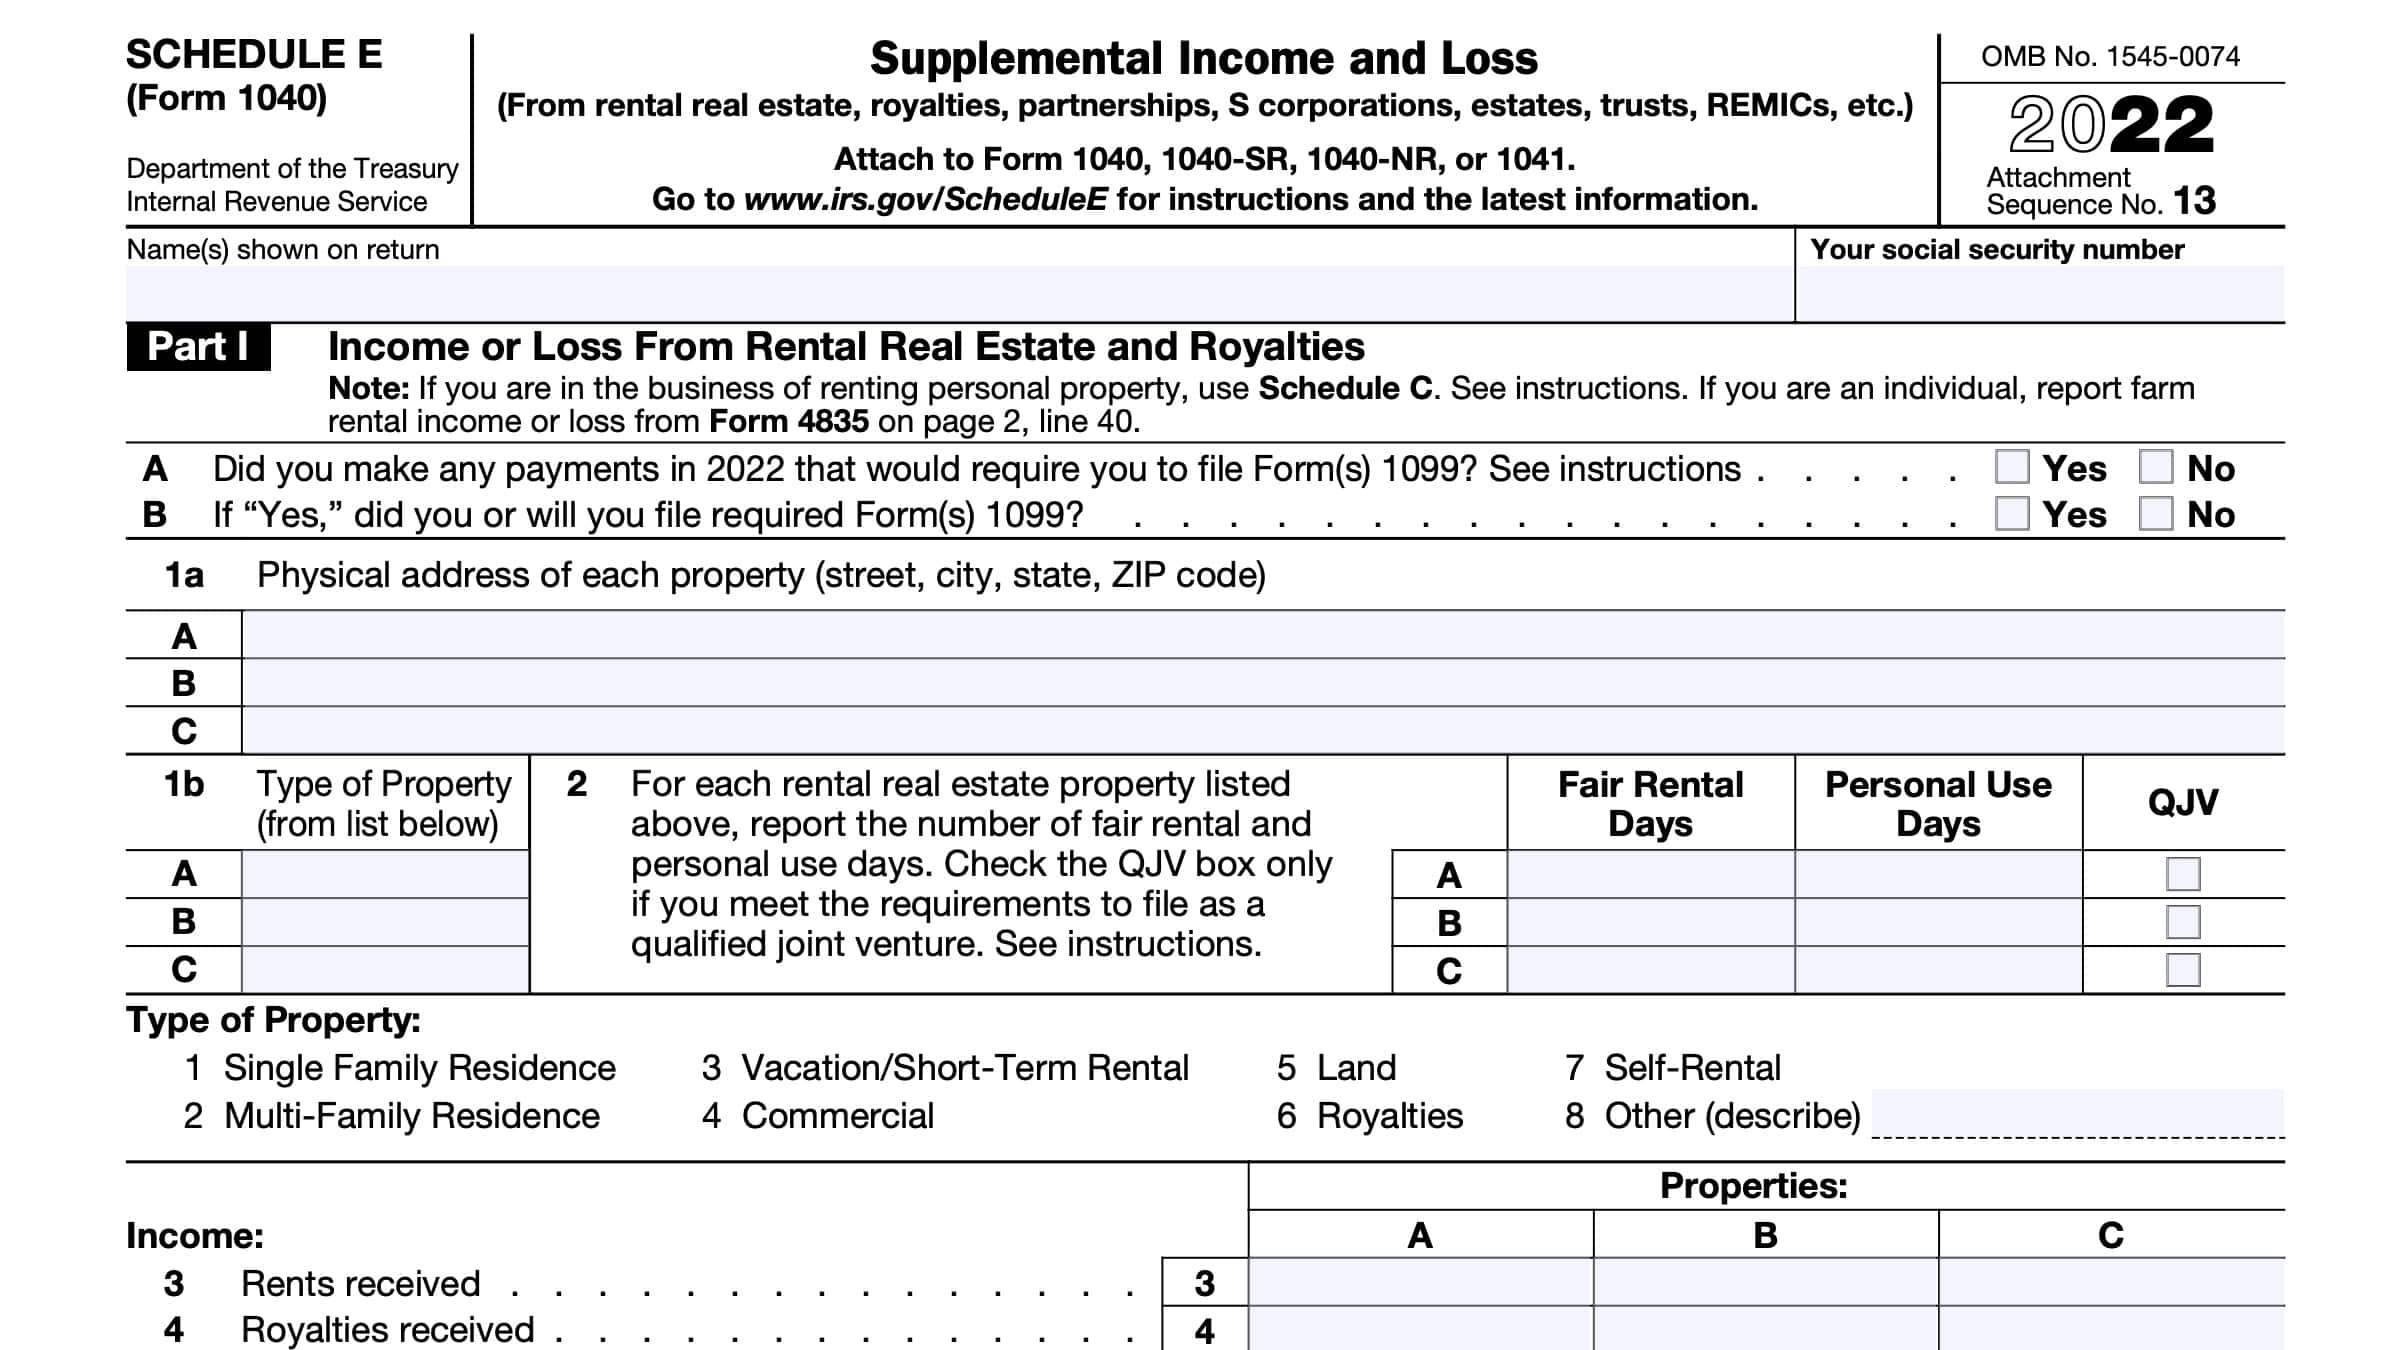 IRS Schedule E Instructions Supplemental and Loss